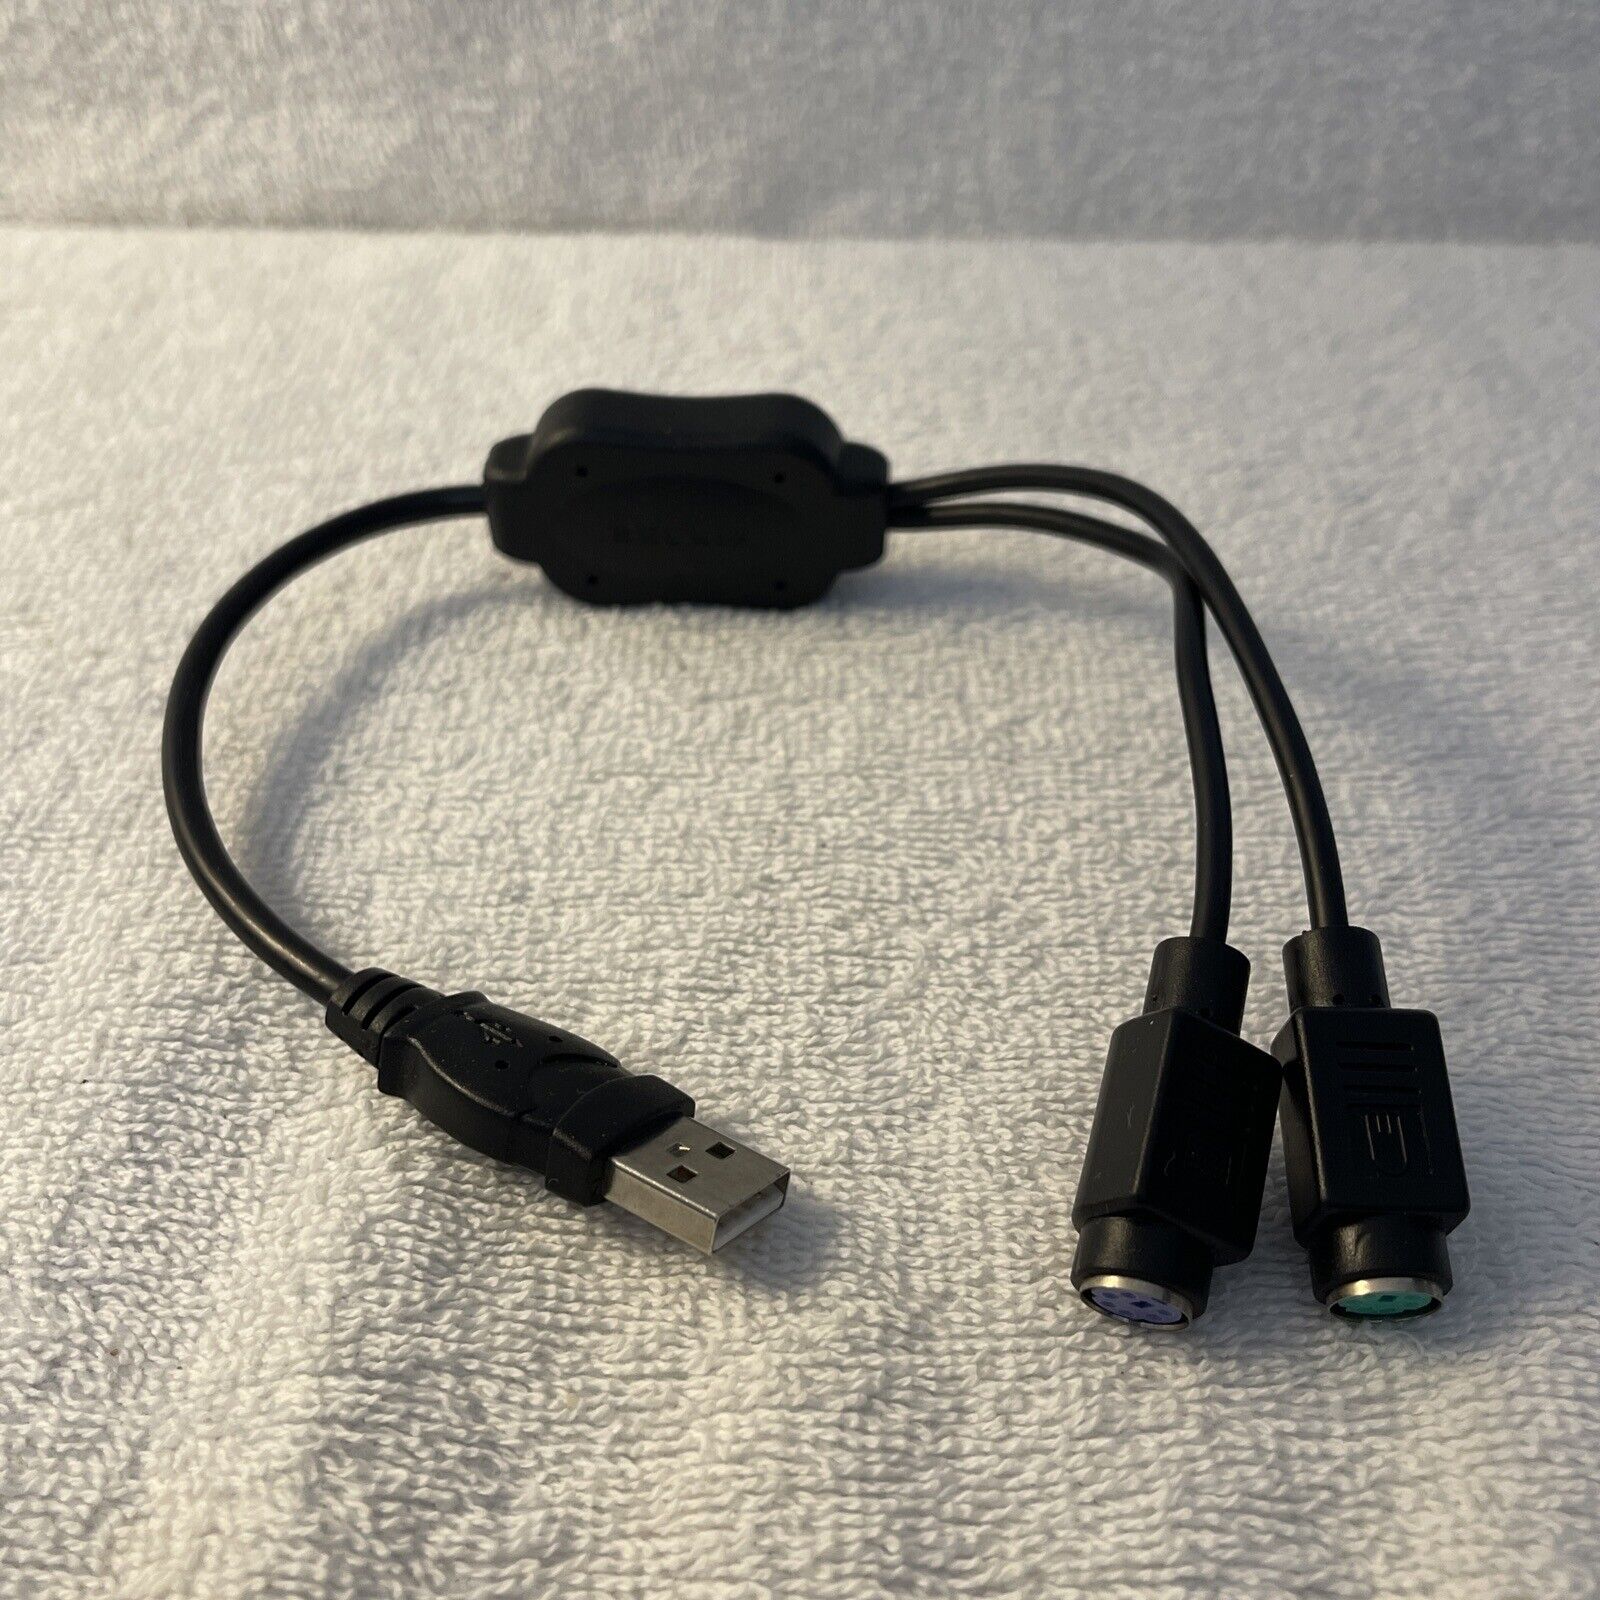 BELKIN USB Dual PS/2 Adapter F5U119vE1 P81706-A Cable Adapter Keyboard / Mouse